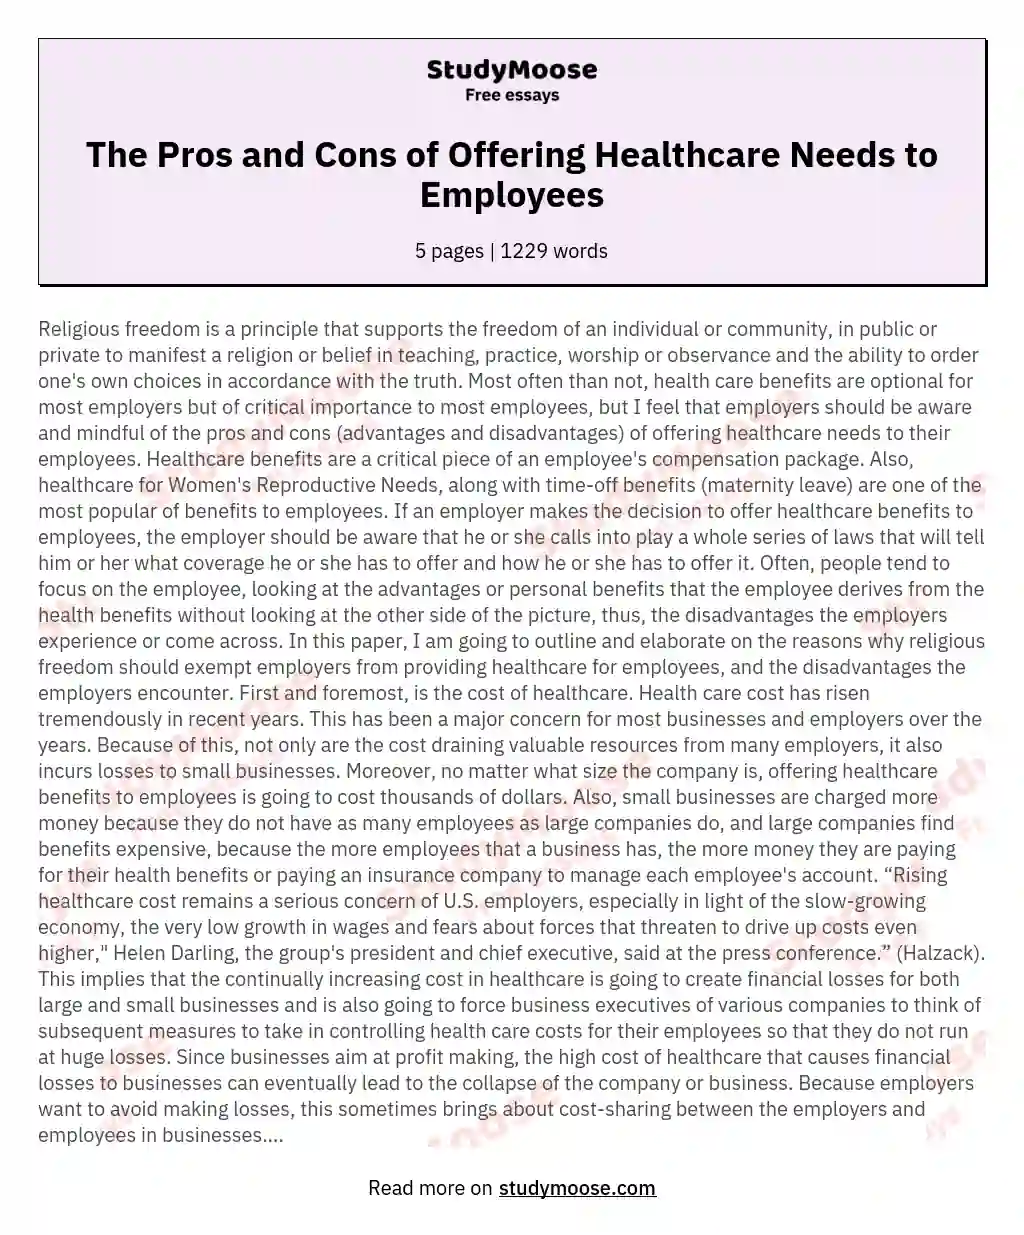 The Pros and Cons of Offering Healthcare Needs to Employees essay